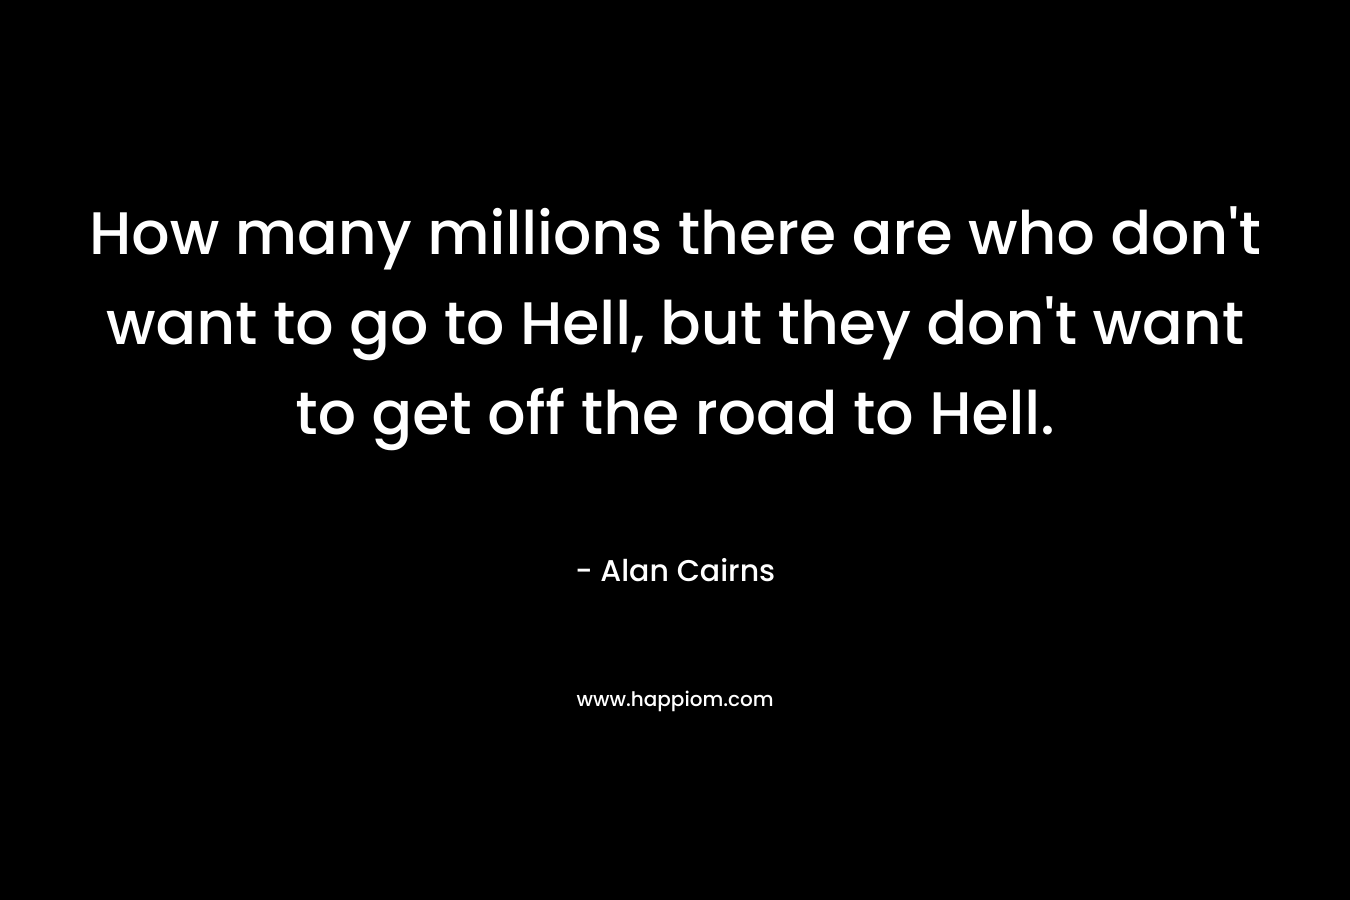 How many millions there are who don't want to go to Hell, but they don't want to get off the road to Hell.